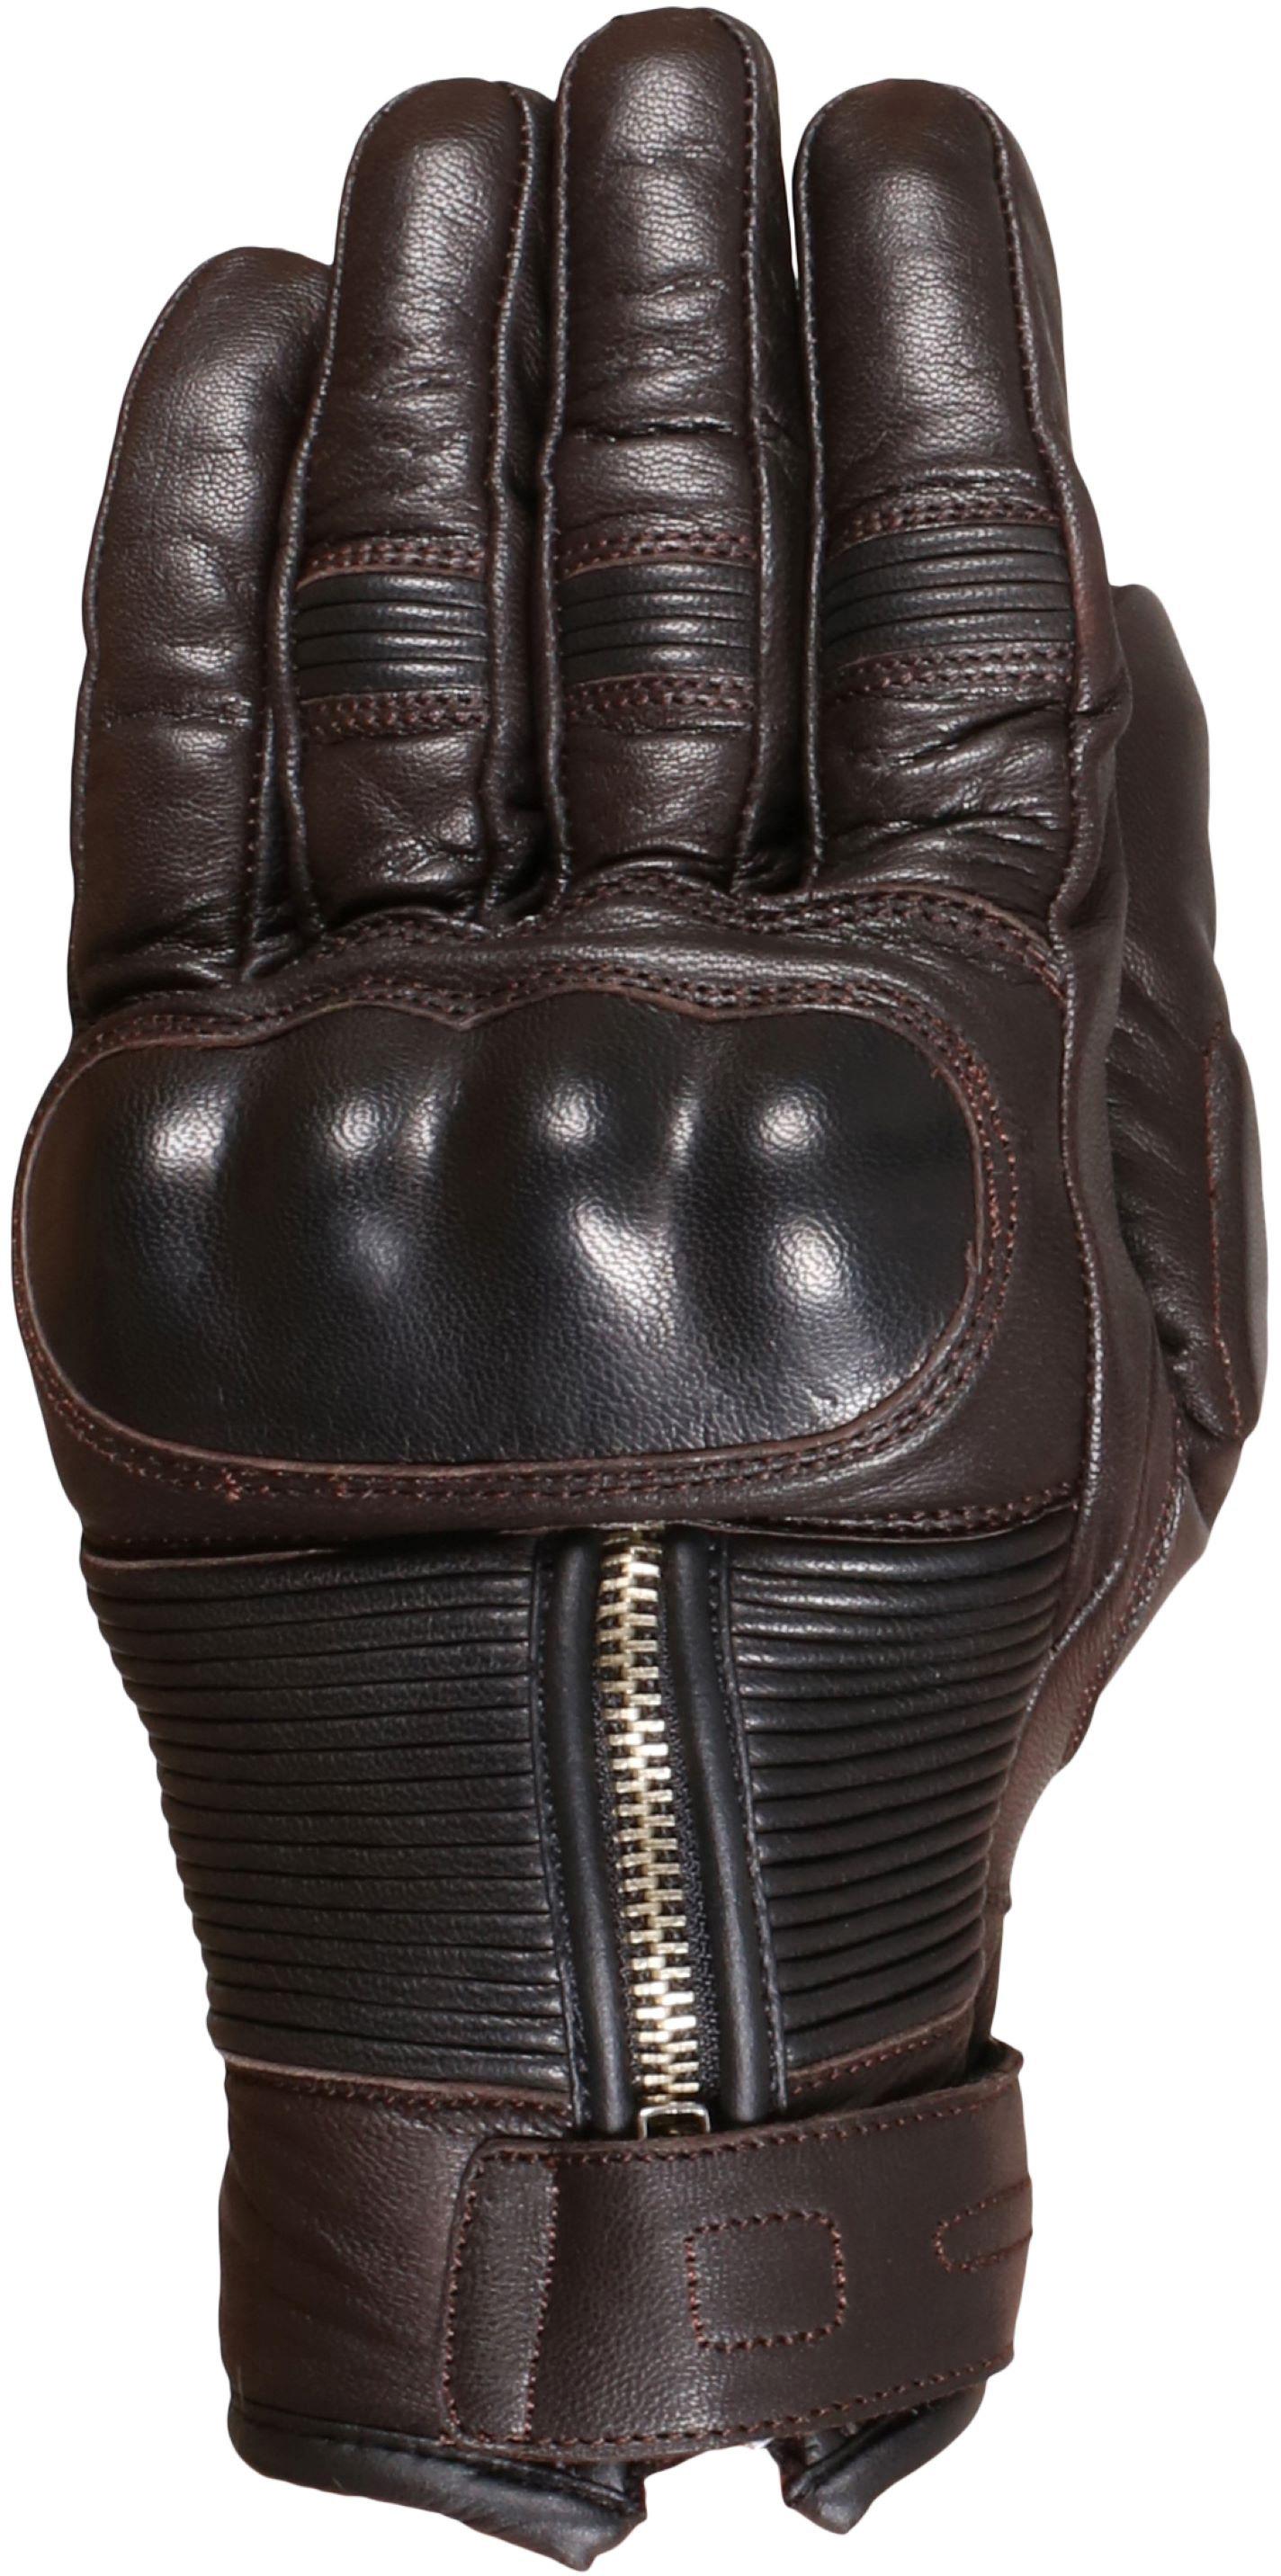 Weise Union Motorcycle Gloves - Brown, M